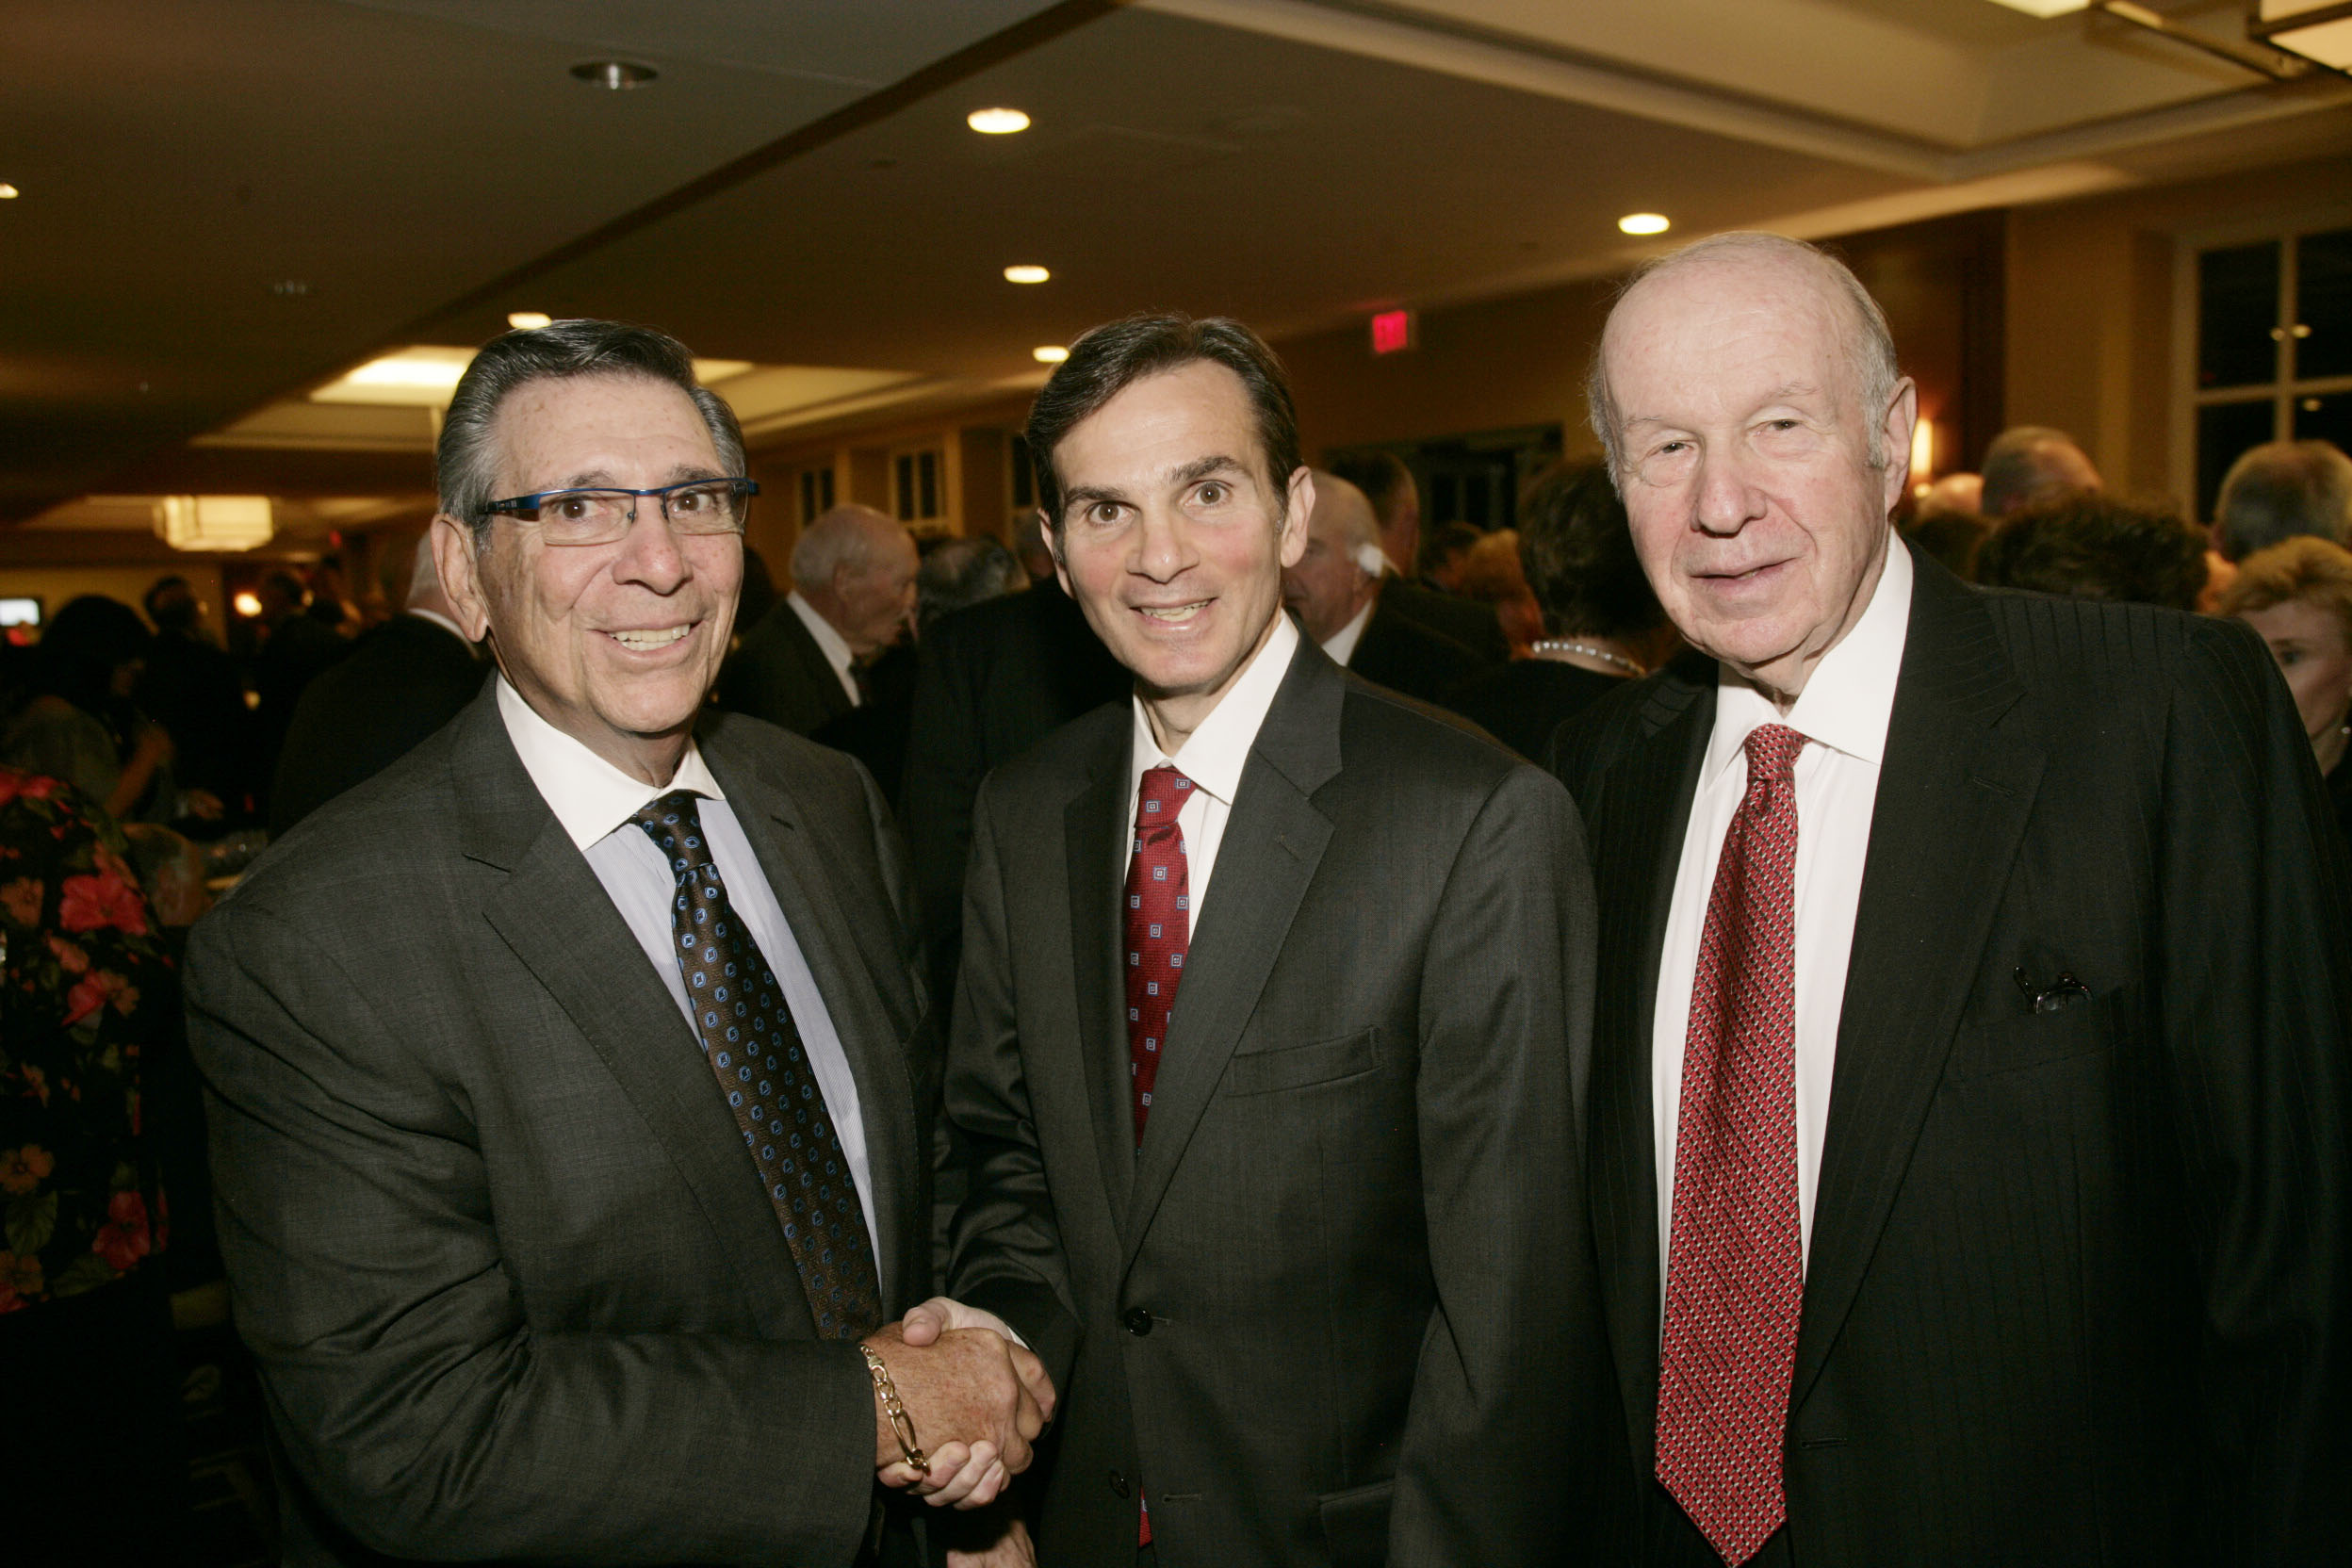 (L toR) United Hebrew’s Chairman of the Board of Directors, Michael R. Rozen with honoree Joseph J. DePaolo, President and CEO of Signature Bank, and Malcolm Lazarus, Senior Chair of the Board of Directors at United Hebrew’s 94th Annual Gala Dinner Dance.